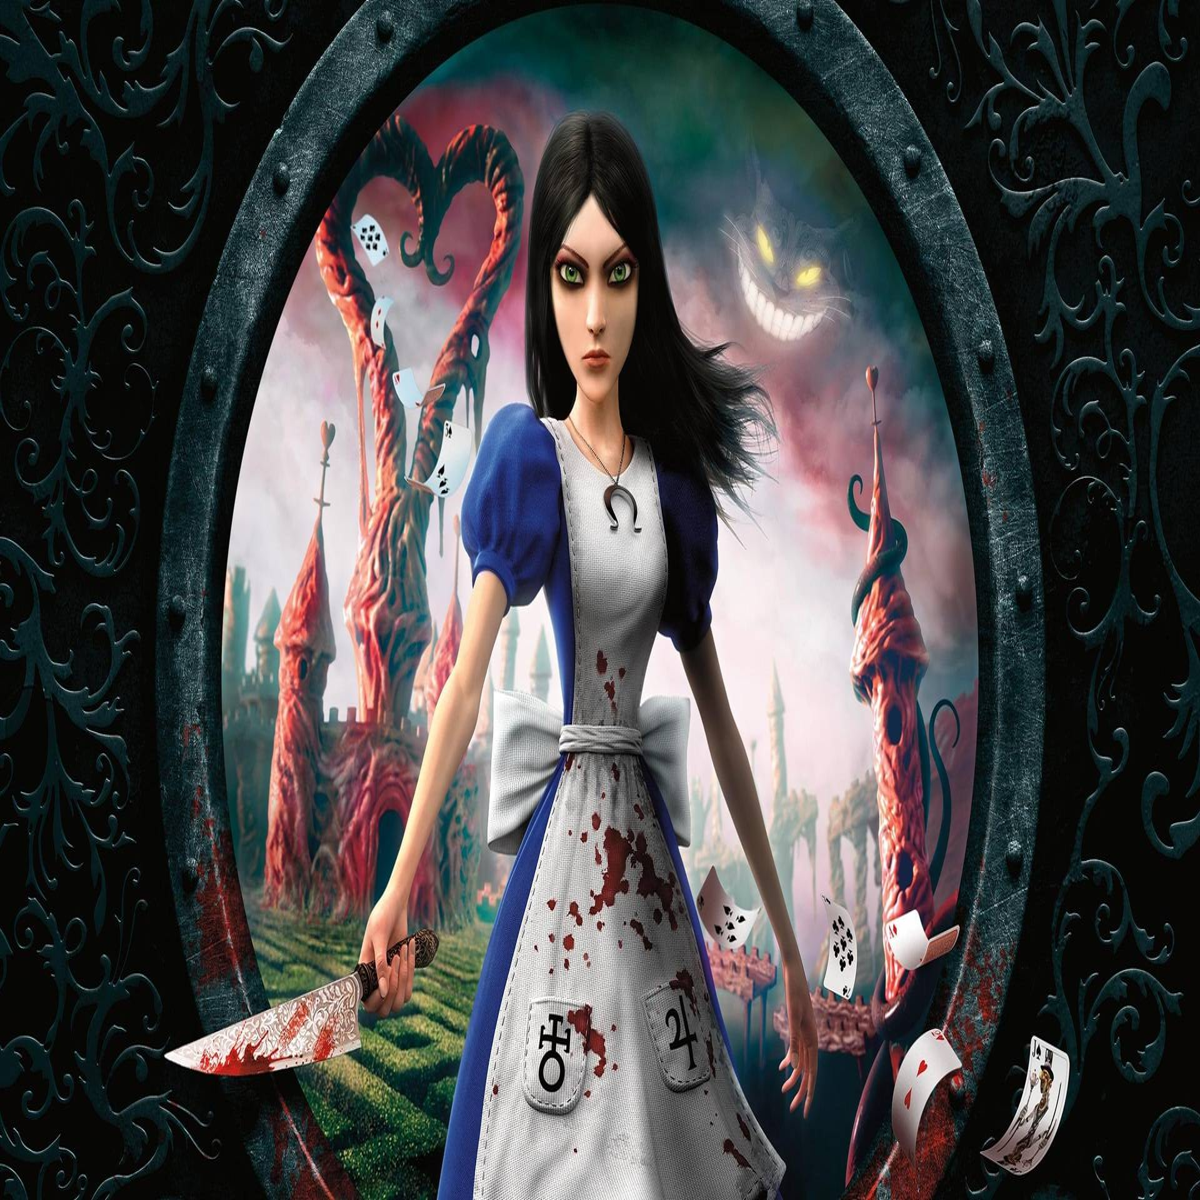 Cult favorite Alice: Madness Returns comes to Xbox One backwards  compatibility